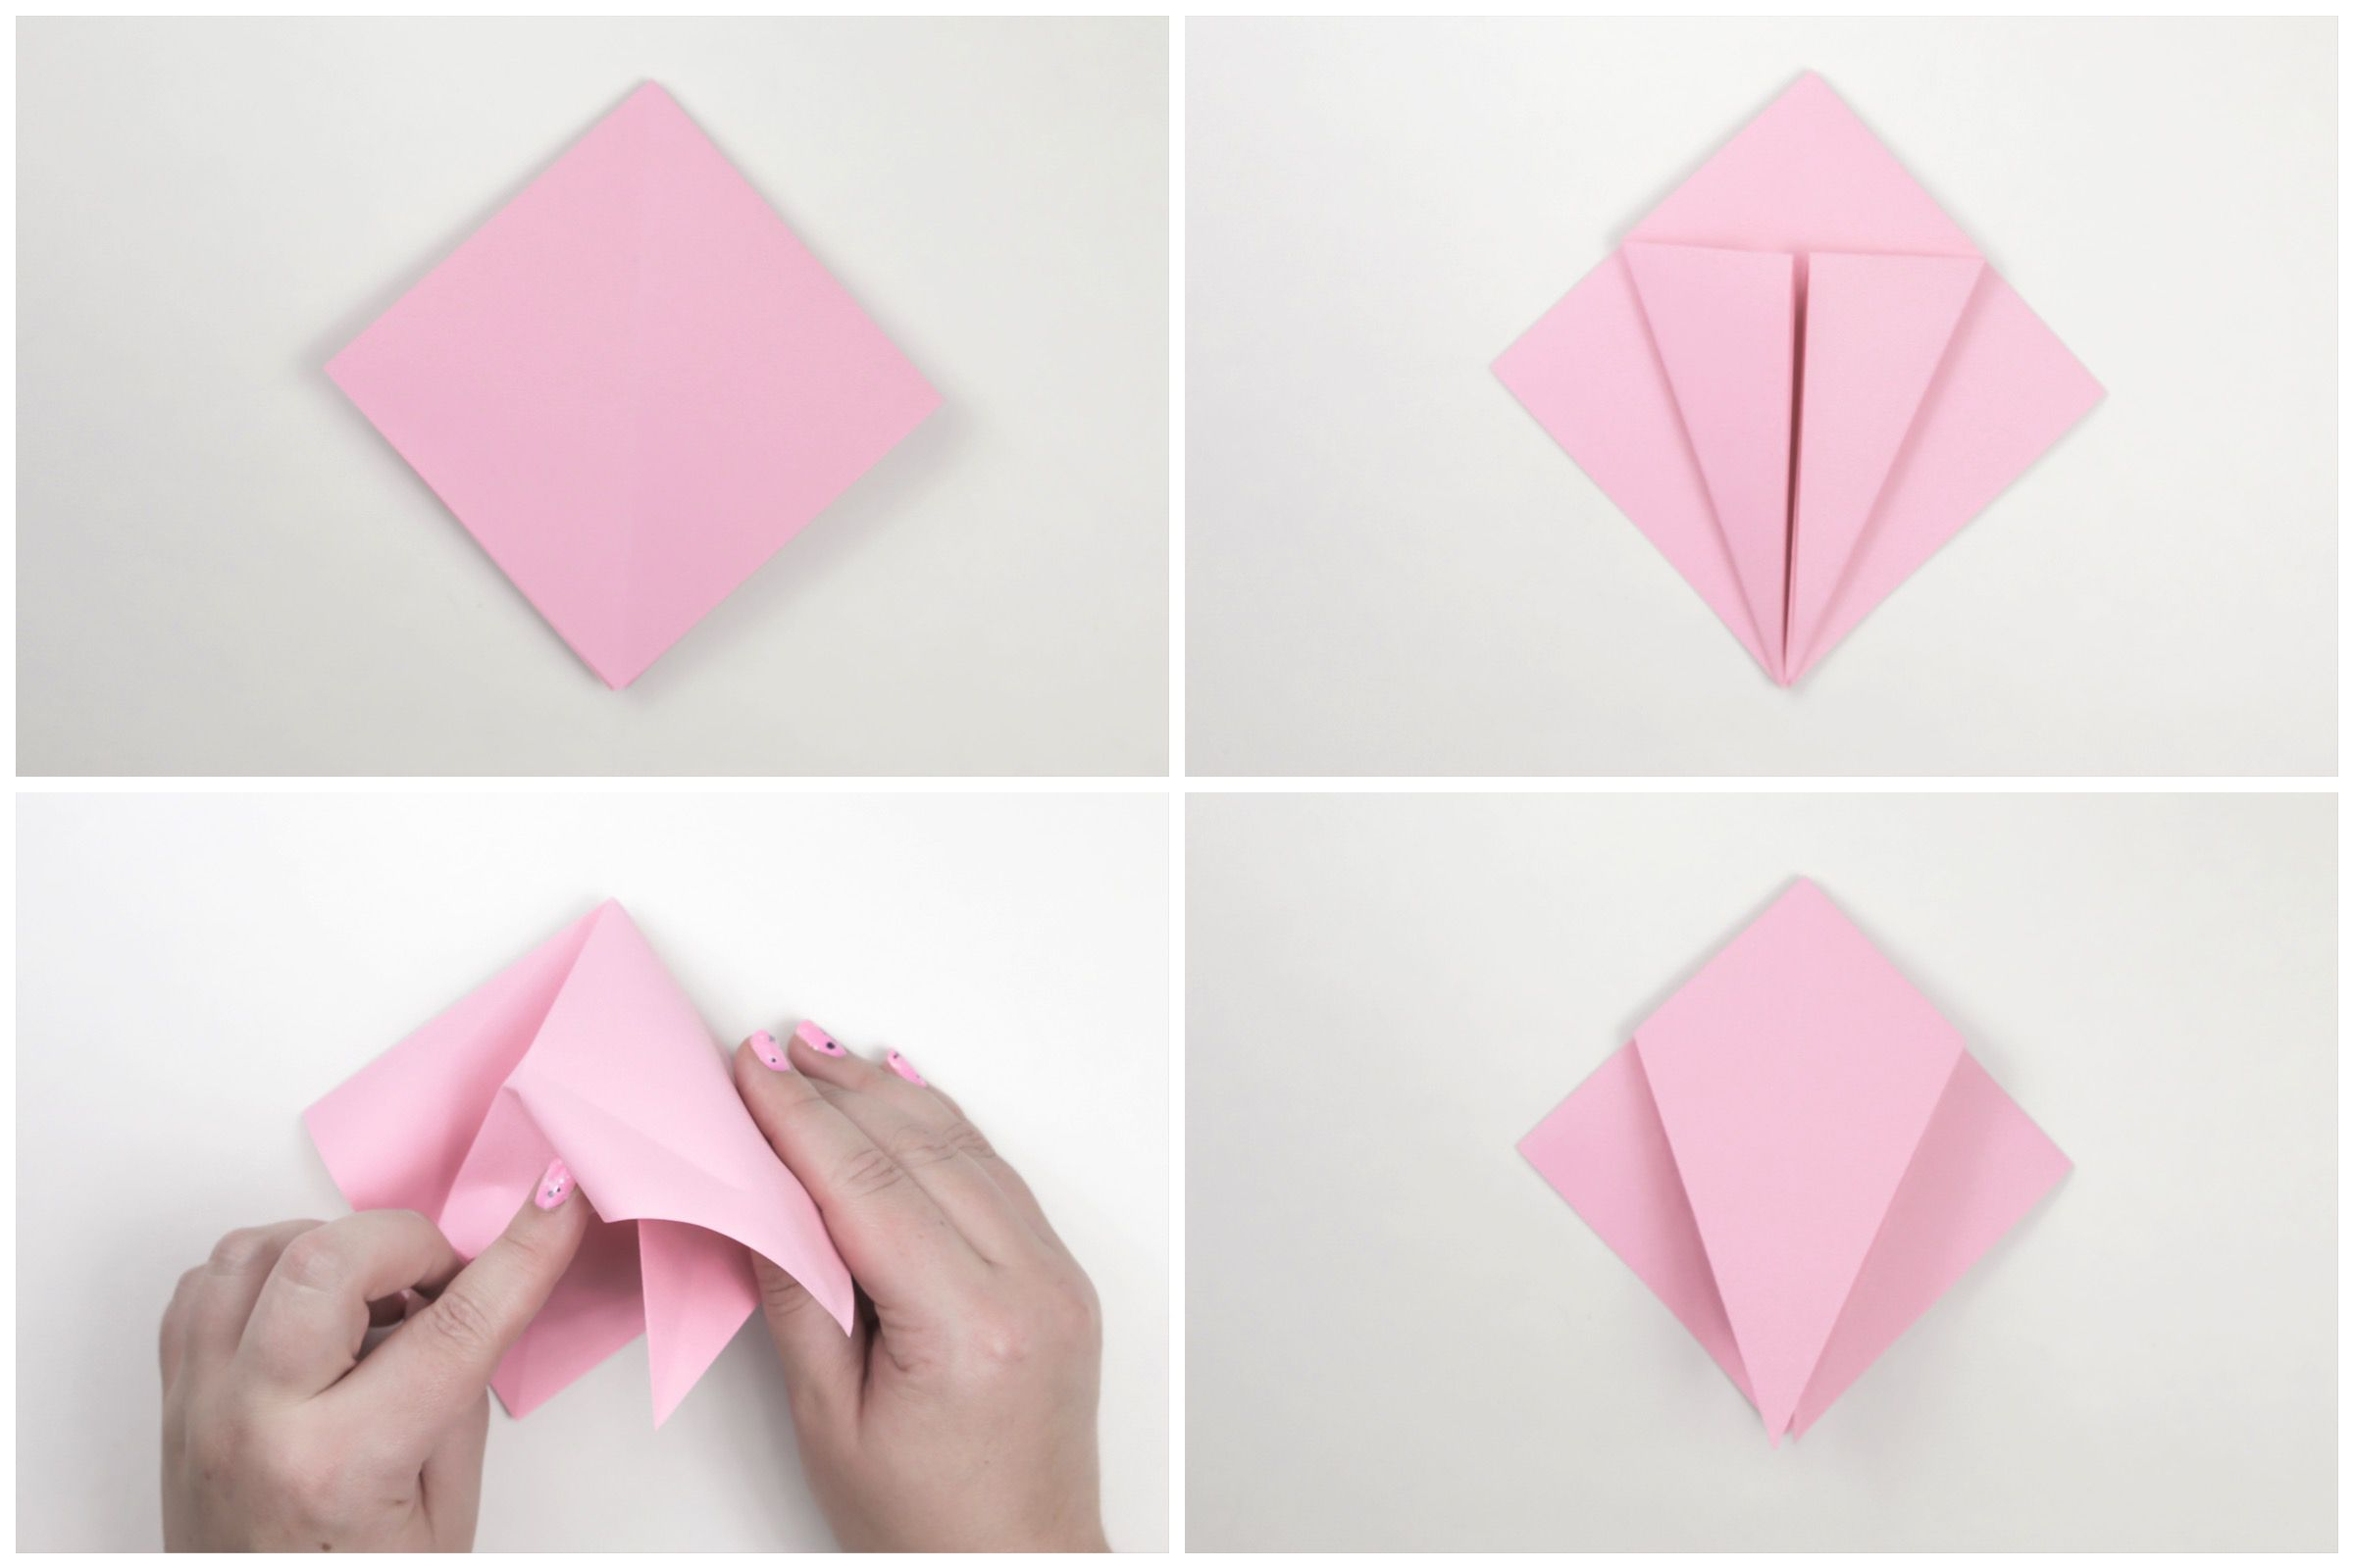 How To Make An Origami Flapping Bird Step By Step Origami Flapping Bird Tutorial